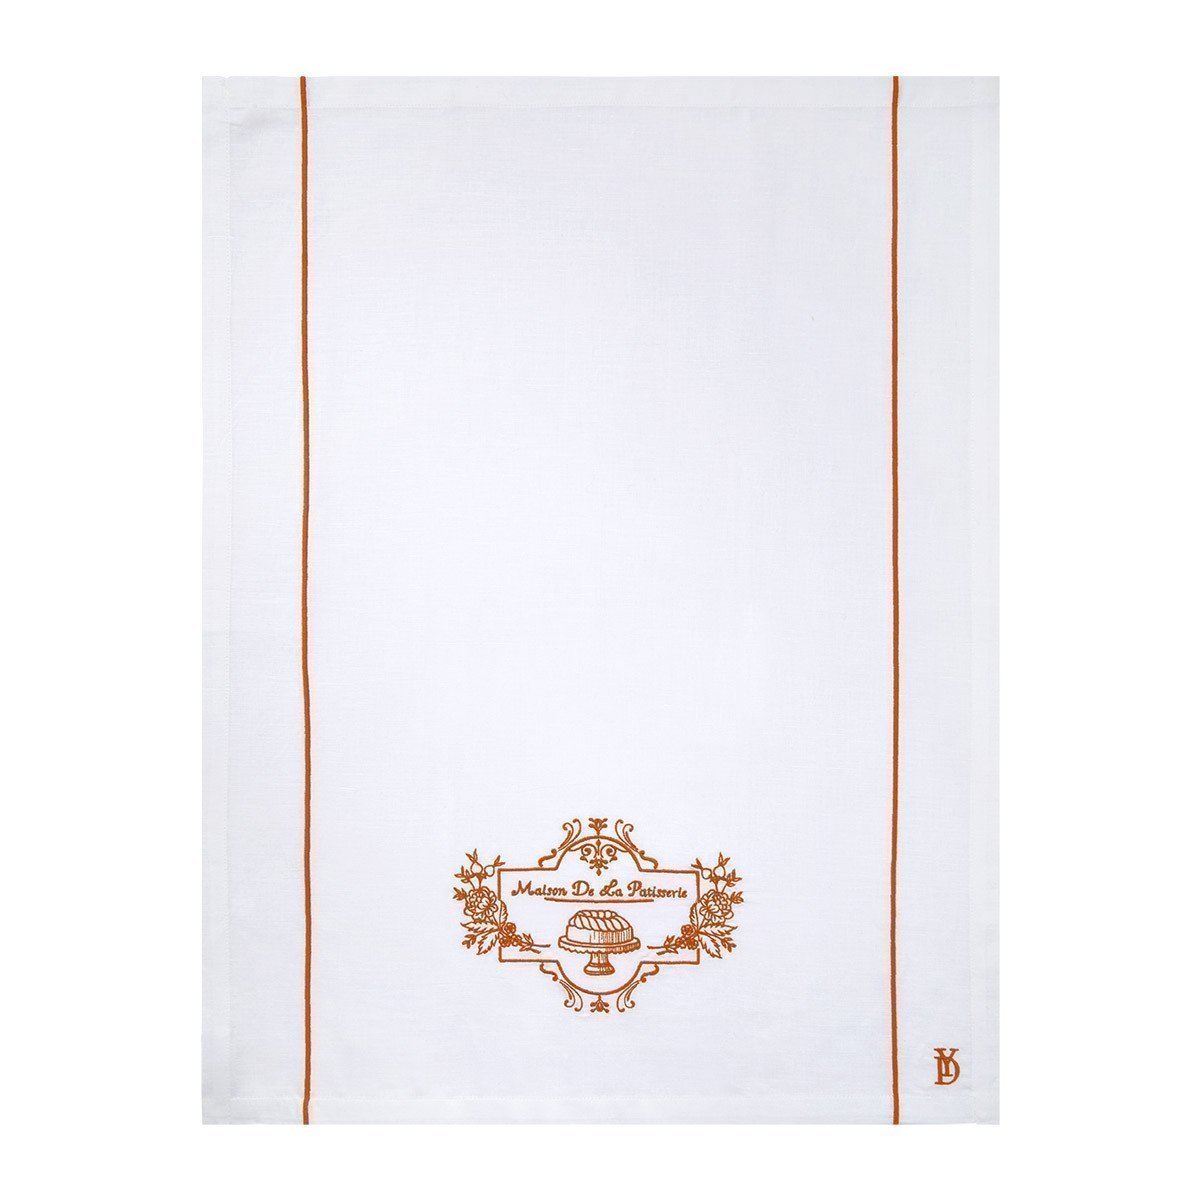 Delice Embroidered Tea Towel